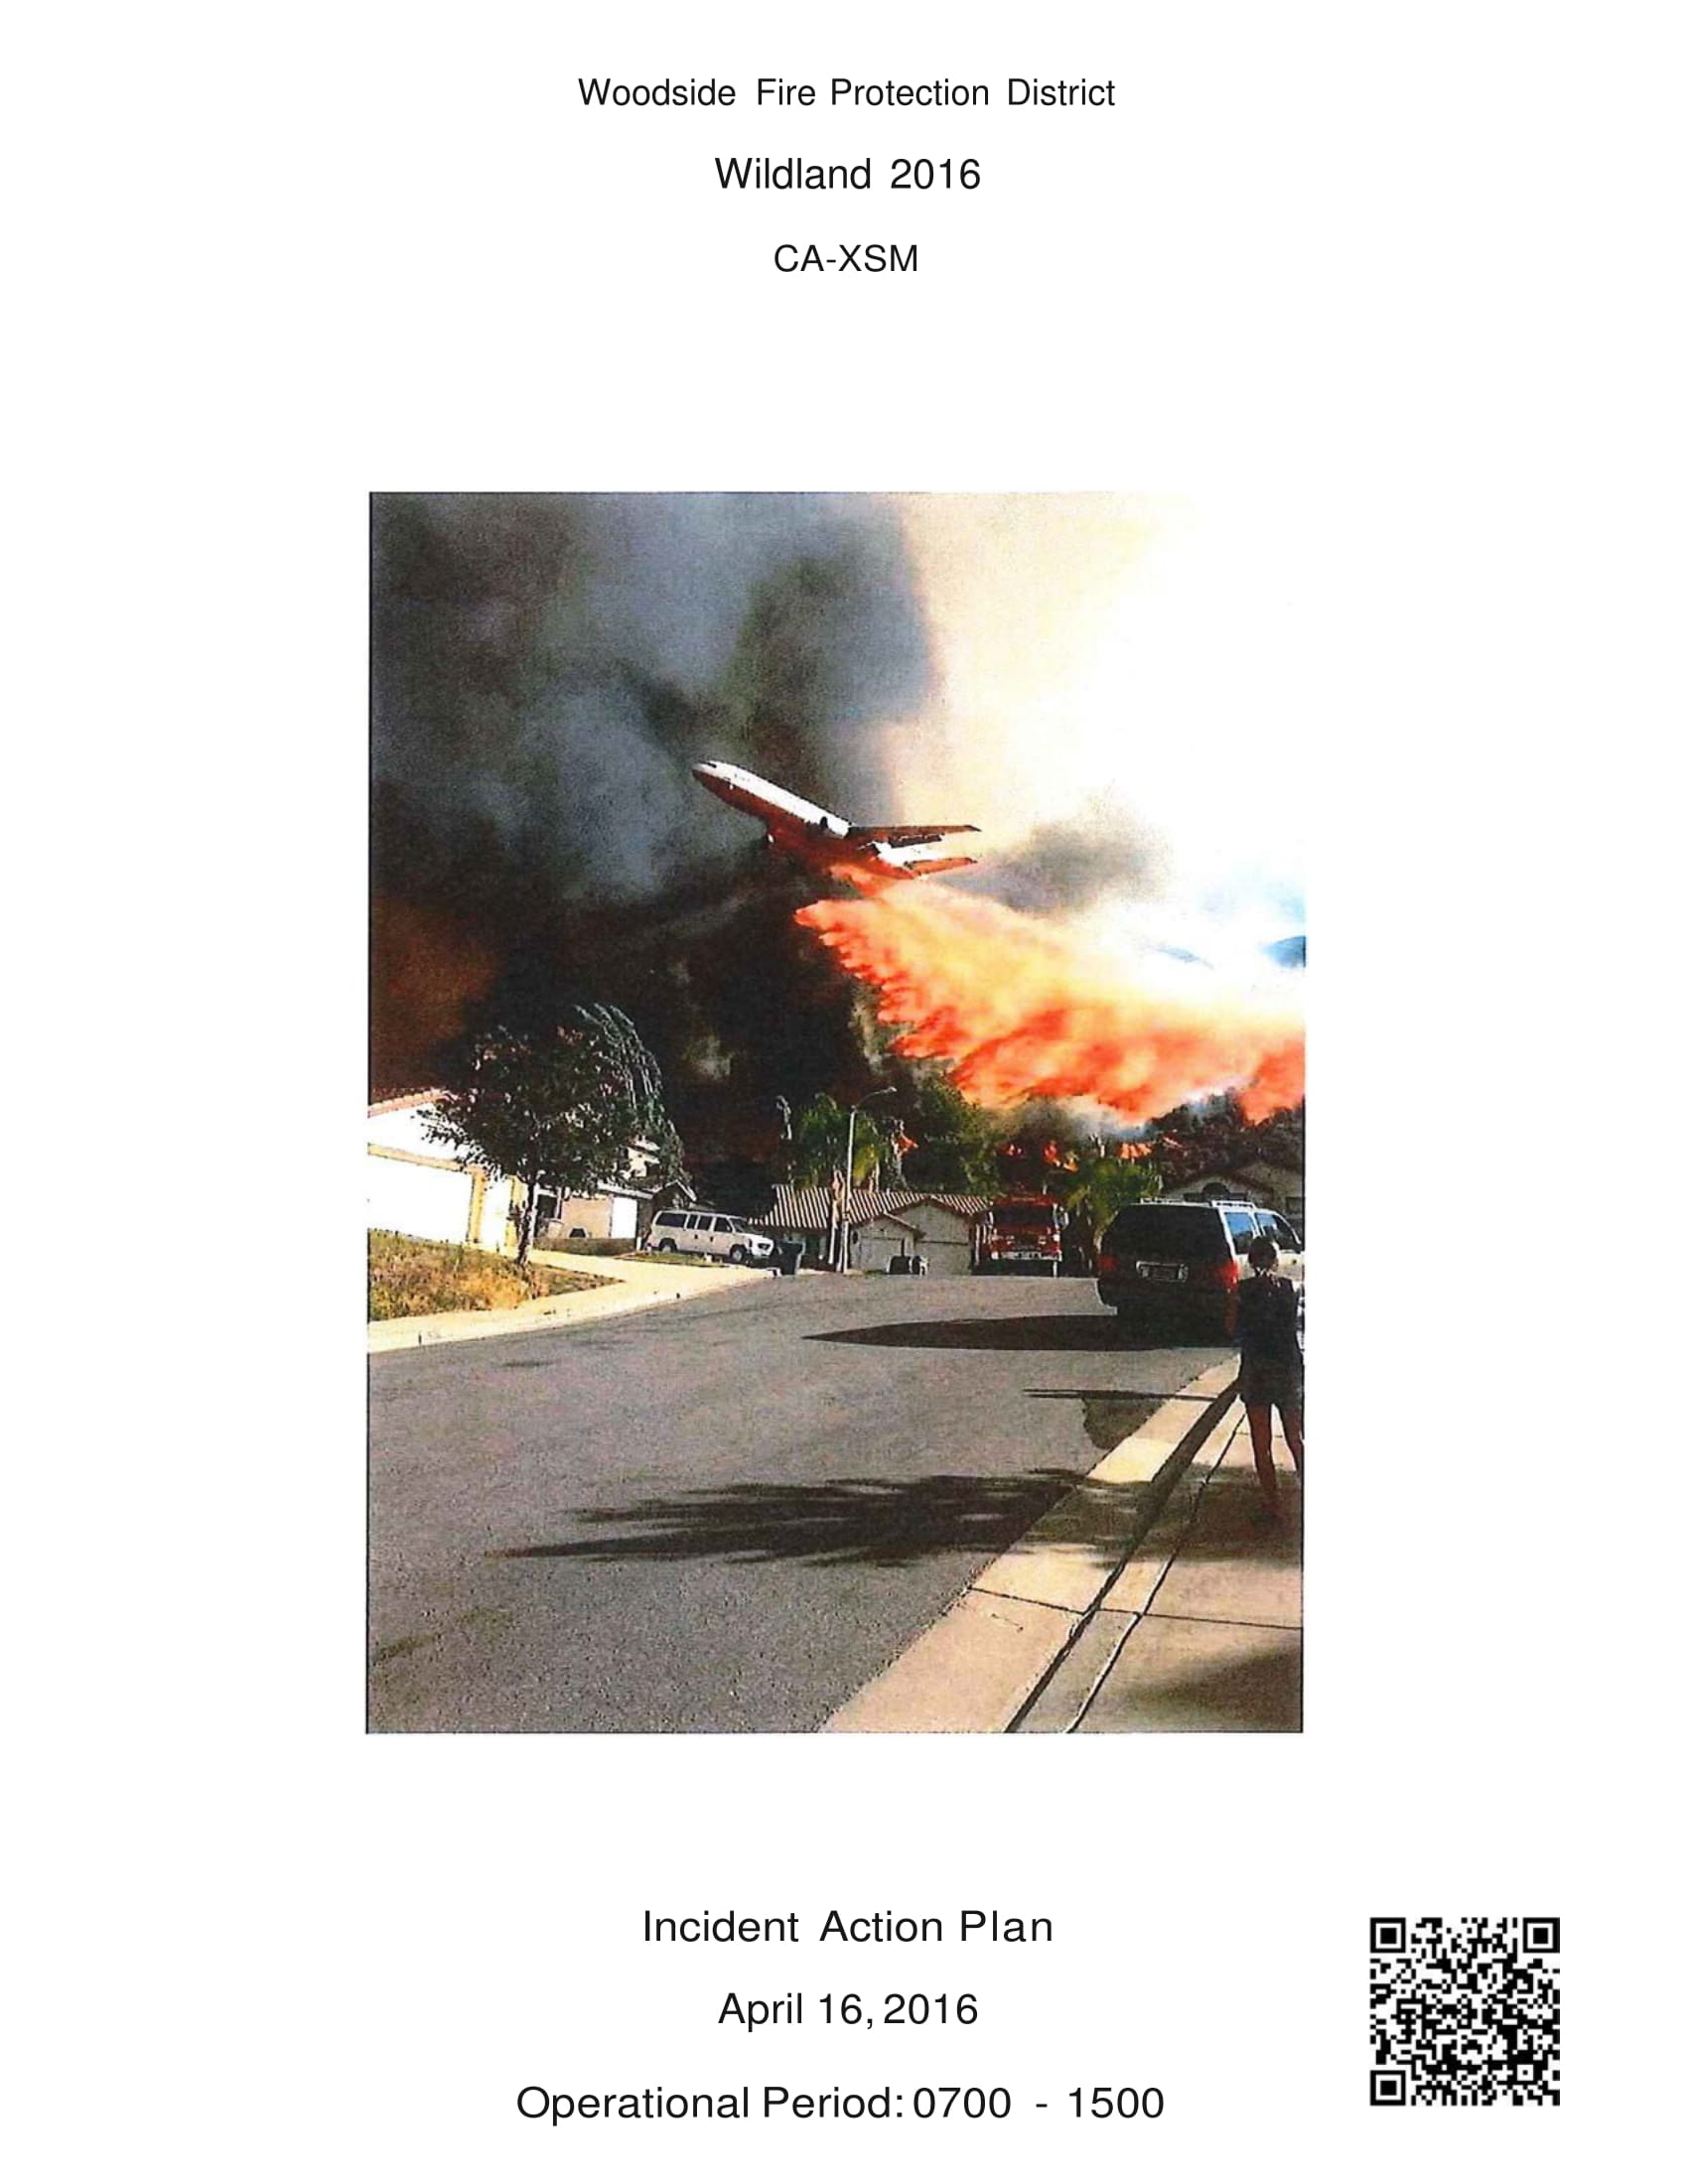 wildland fire protection incident action plan example